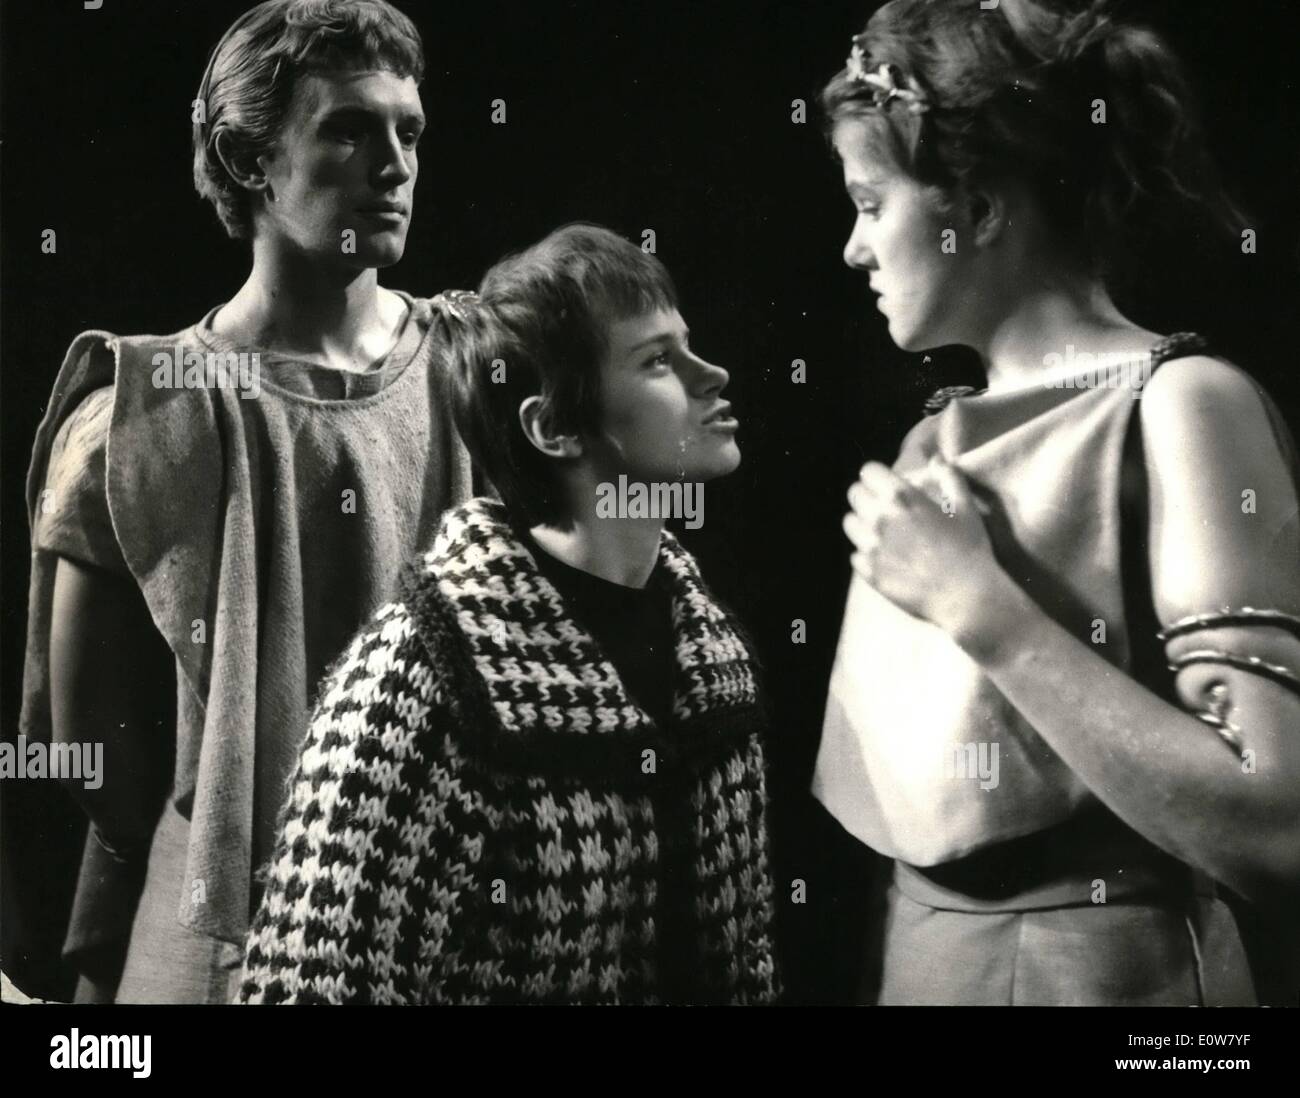 Jan. 01, 1962 - ''A Midsummer night's Dream'' - At royal court Theatre. Sir Michael Redgrave's Children take part...: A dress rehearsal was held this afternoon at the Royal Court Theatre of the English Stage Company production of ''A Midsummer Night's Dream''.. Photo Shows L - R: during the rehearsal today Corin Redgrave (Lysander); Rita Tushingham (Hermia) and Lynn Redgrave (Helena).... Gorin and Lynn Redgrave are children of Sir Michael Redgrave....Rita Tushingham rose to stardom with her performance in the film ''Tas of Honey' Stock Photo